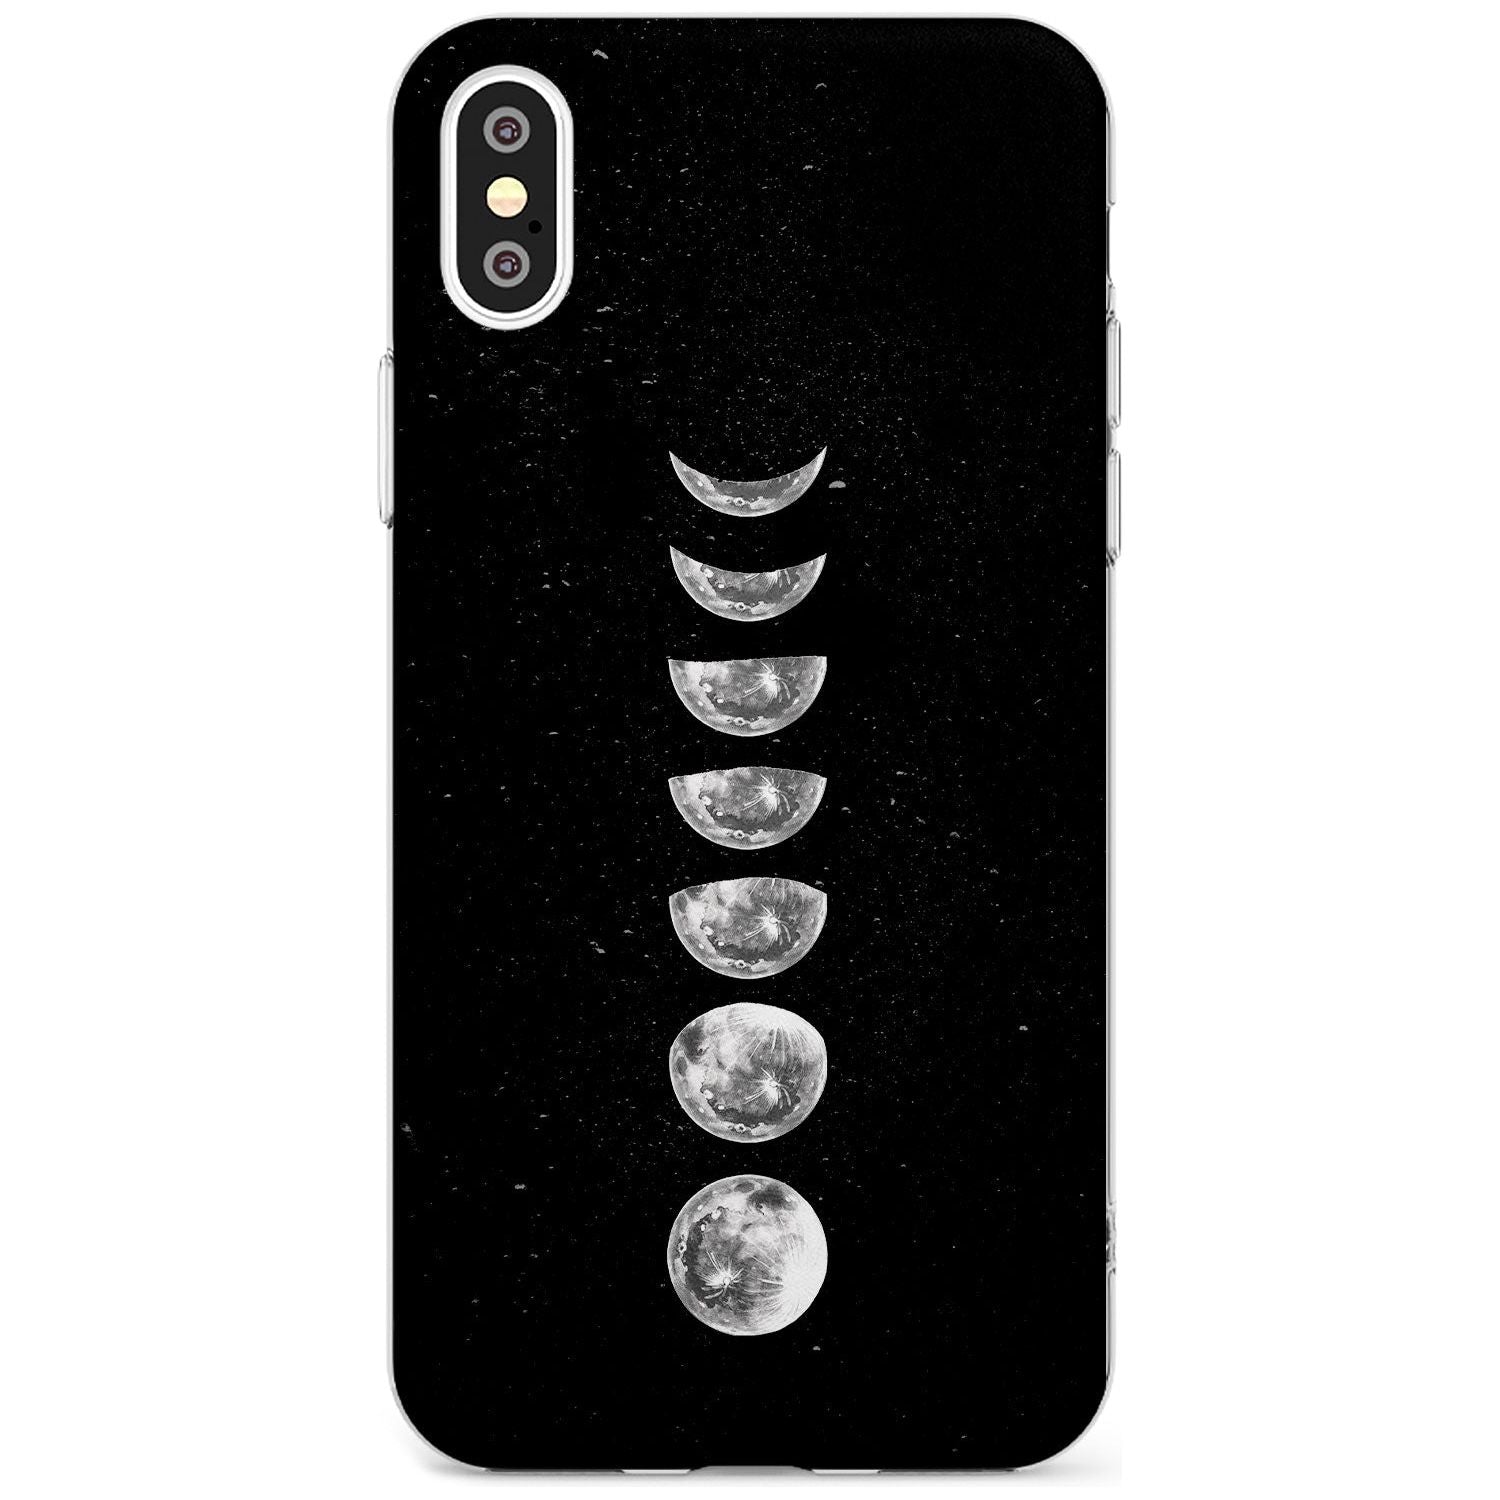 Light Watercolour Moons Black Impact Phone Case for iPhone X XS Max XR